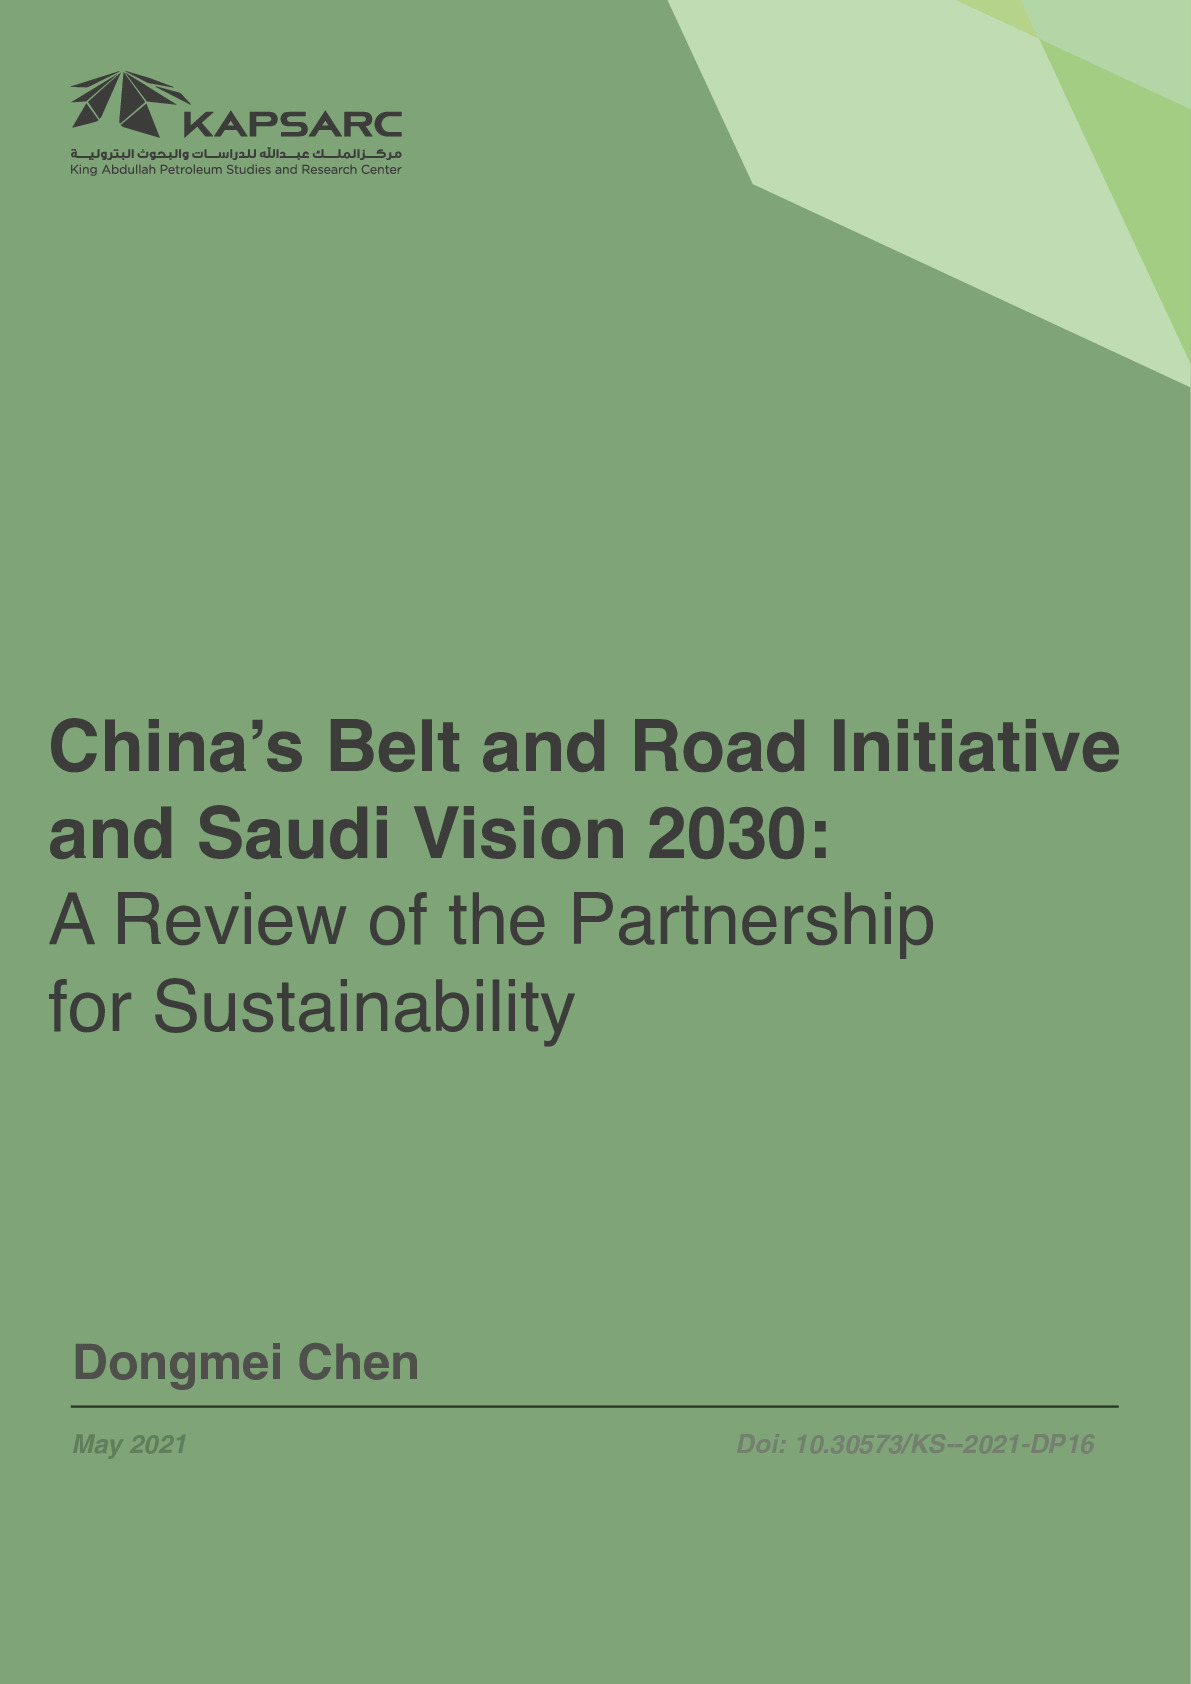 China’s BRI and Saudi Vision 2030: A Review to Partnership for Sustainability